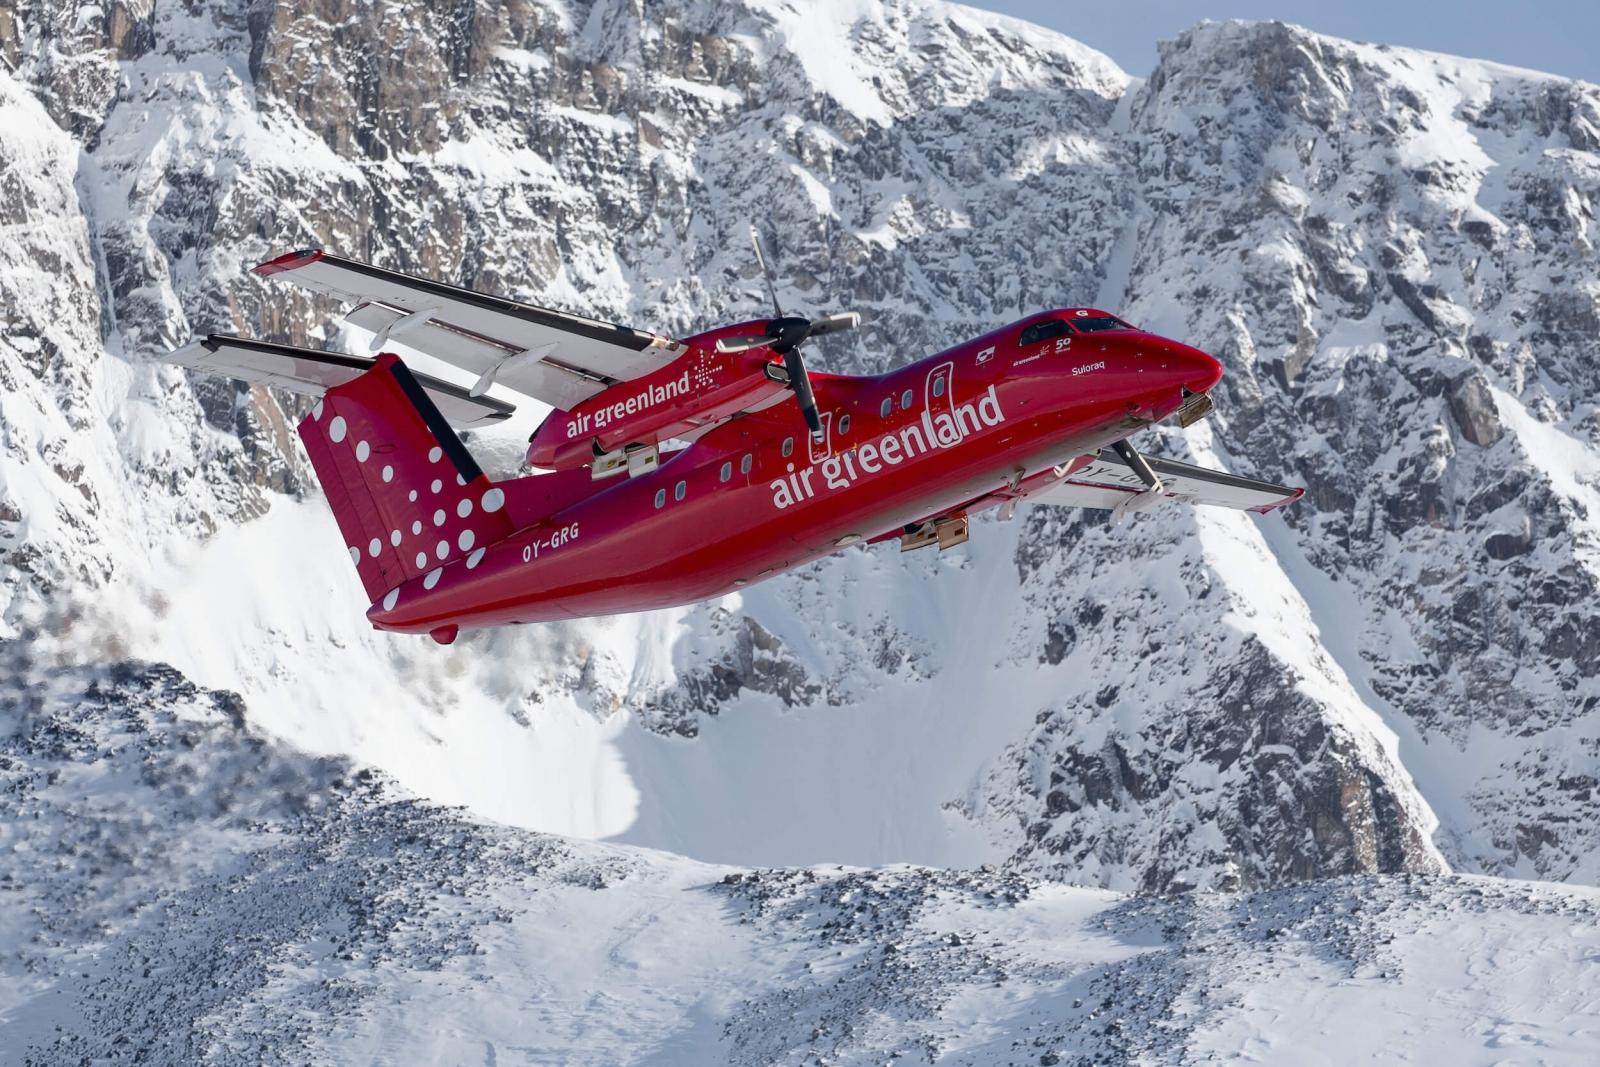 An Air Greenland Dash-8 taking off from Kulusuk in East Greenland. Photo by Mads Pihl